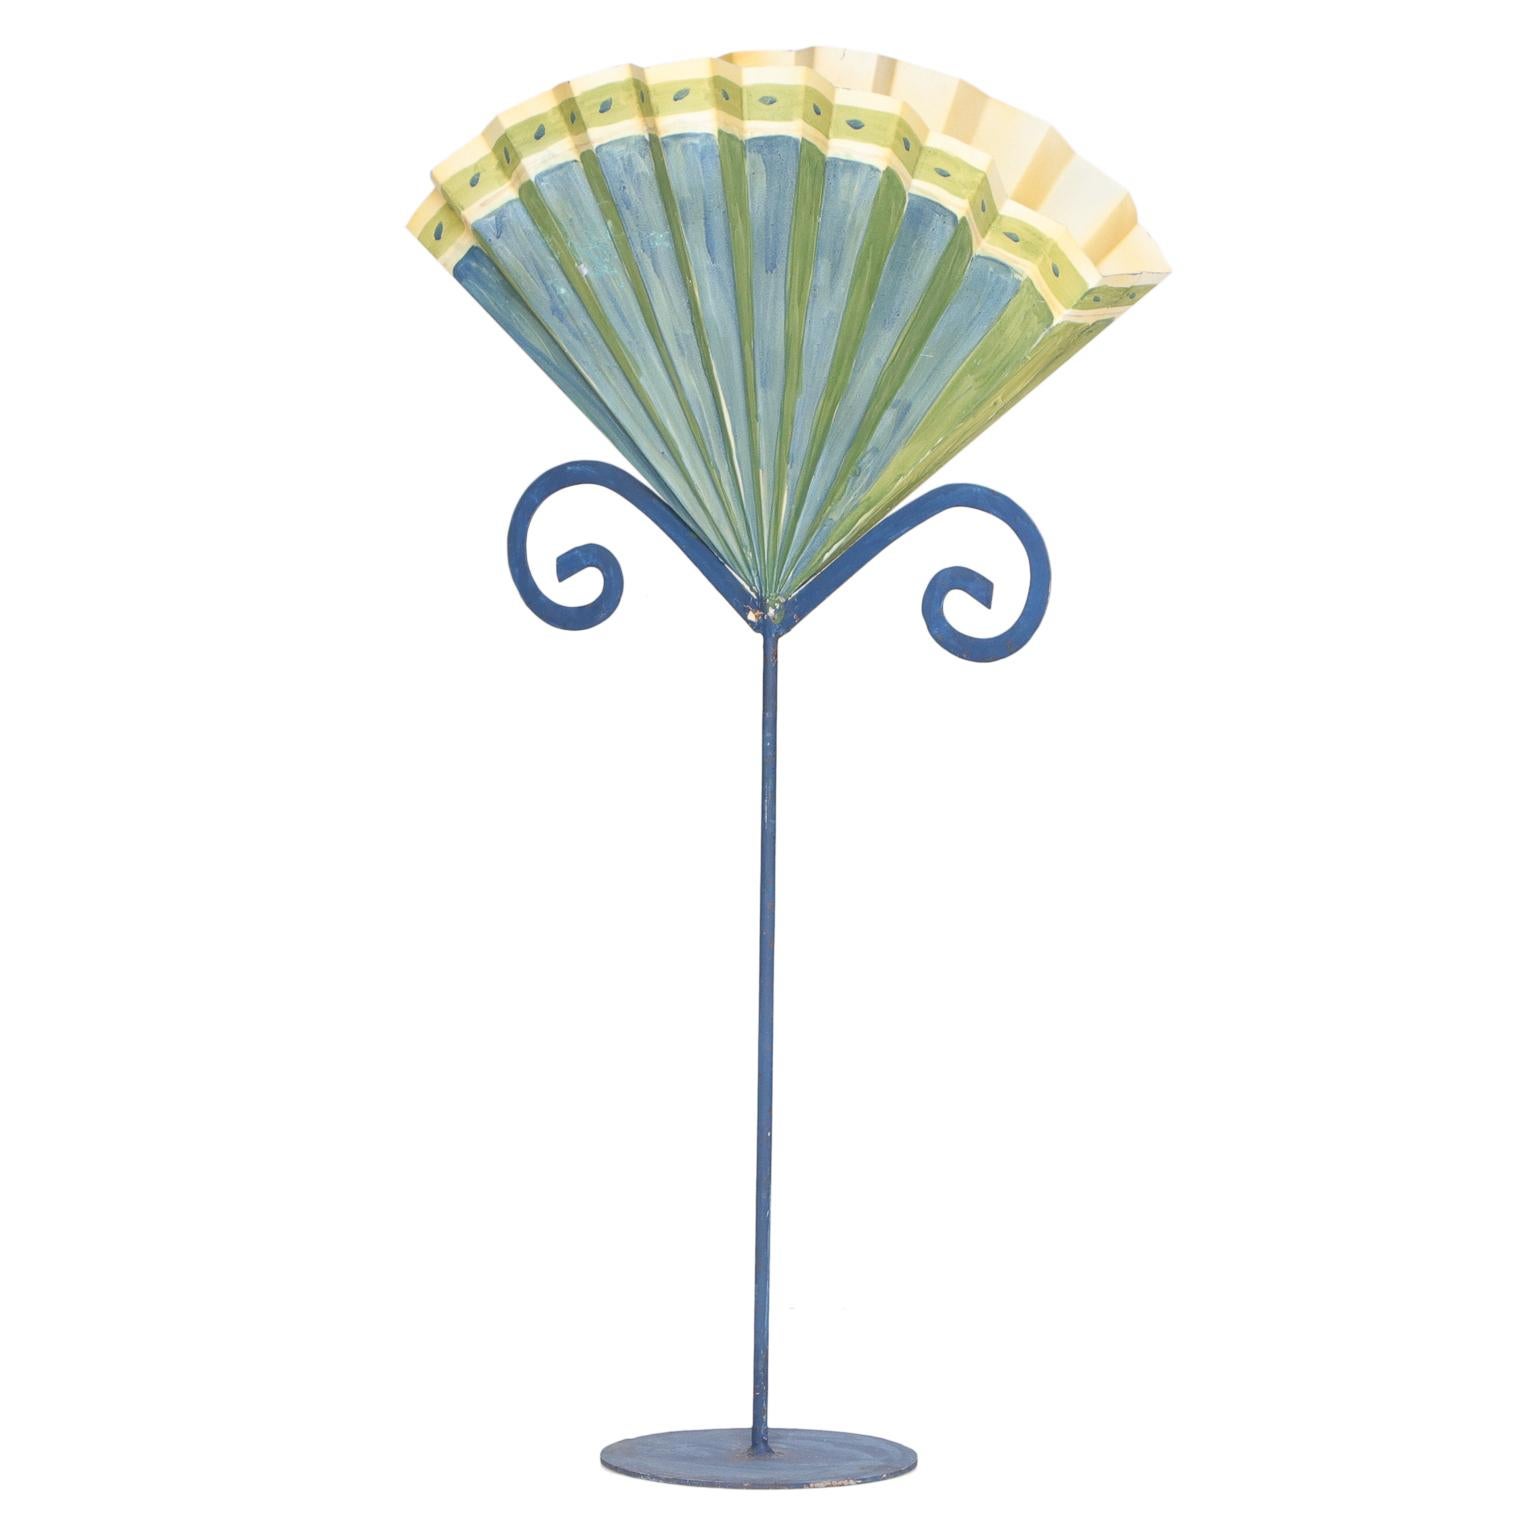 Painted Zinc Fan Formed Flower Stand In Good Condition For Sale In Hixson, TN